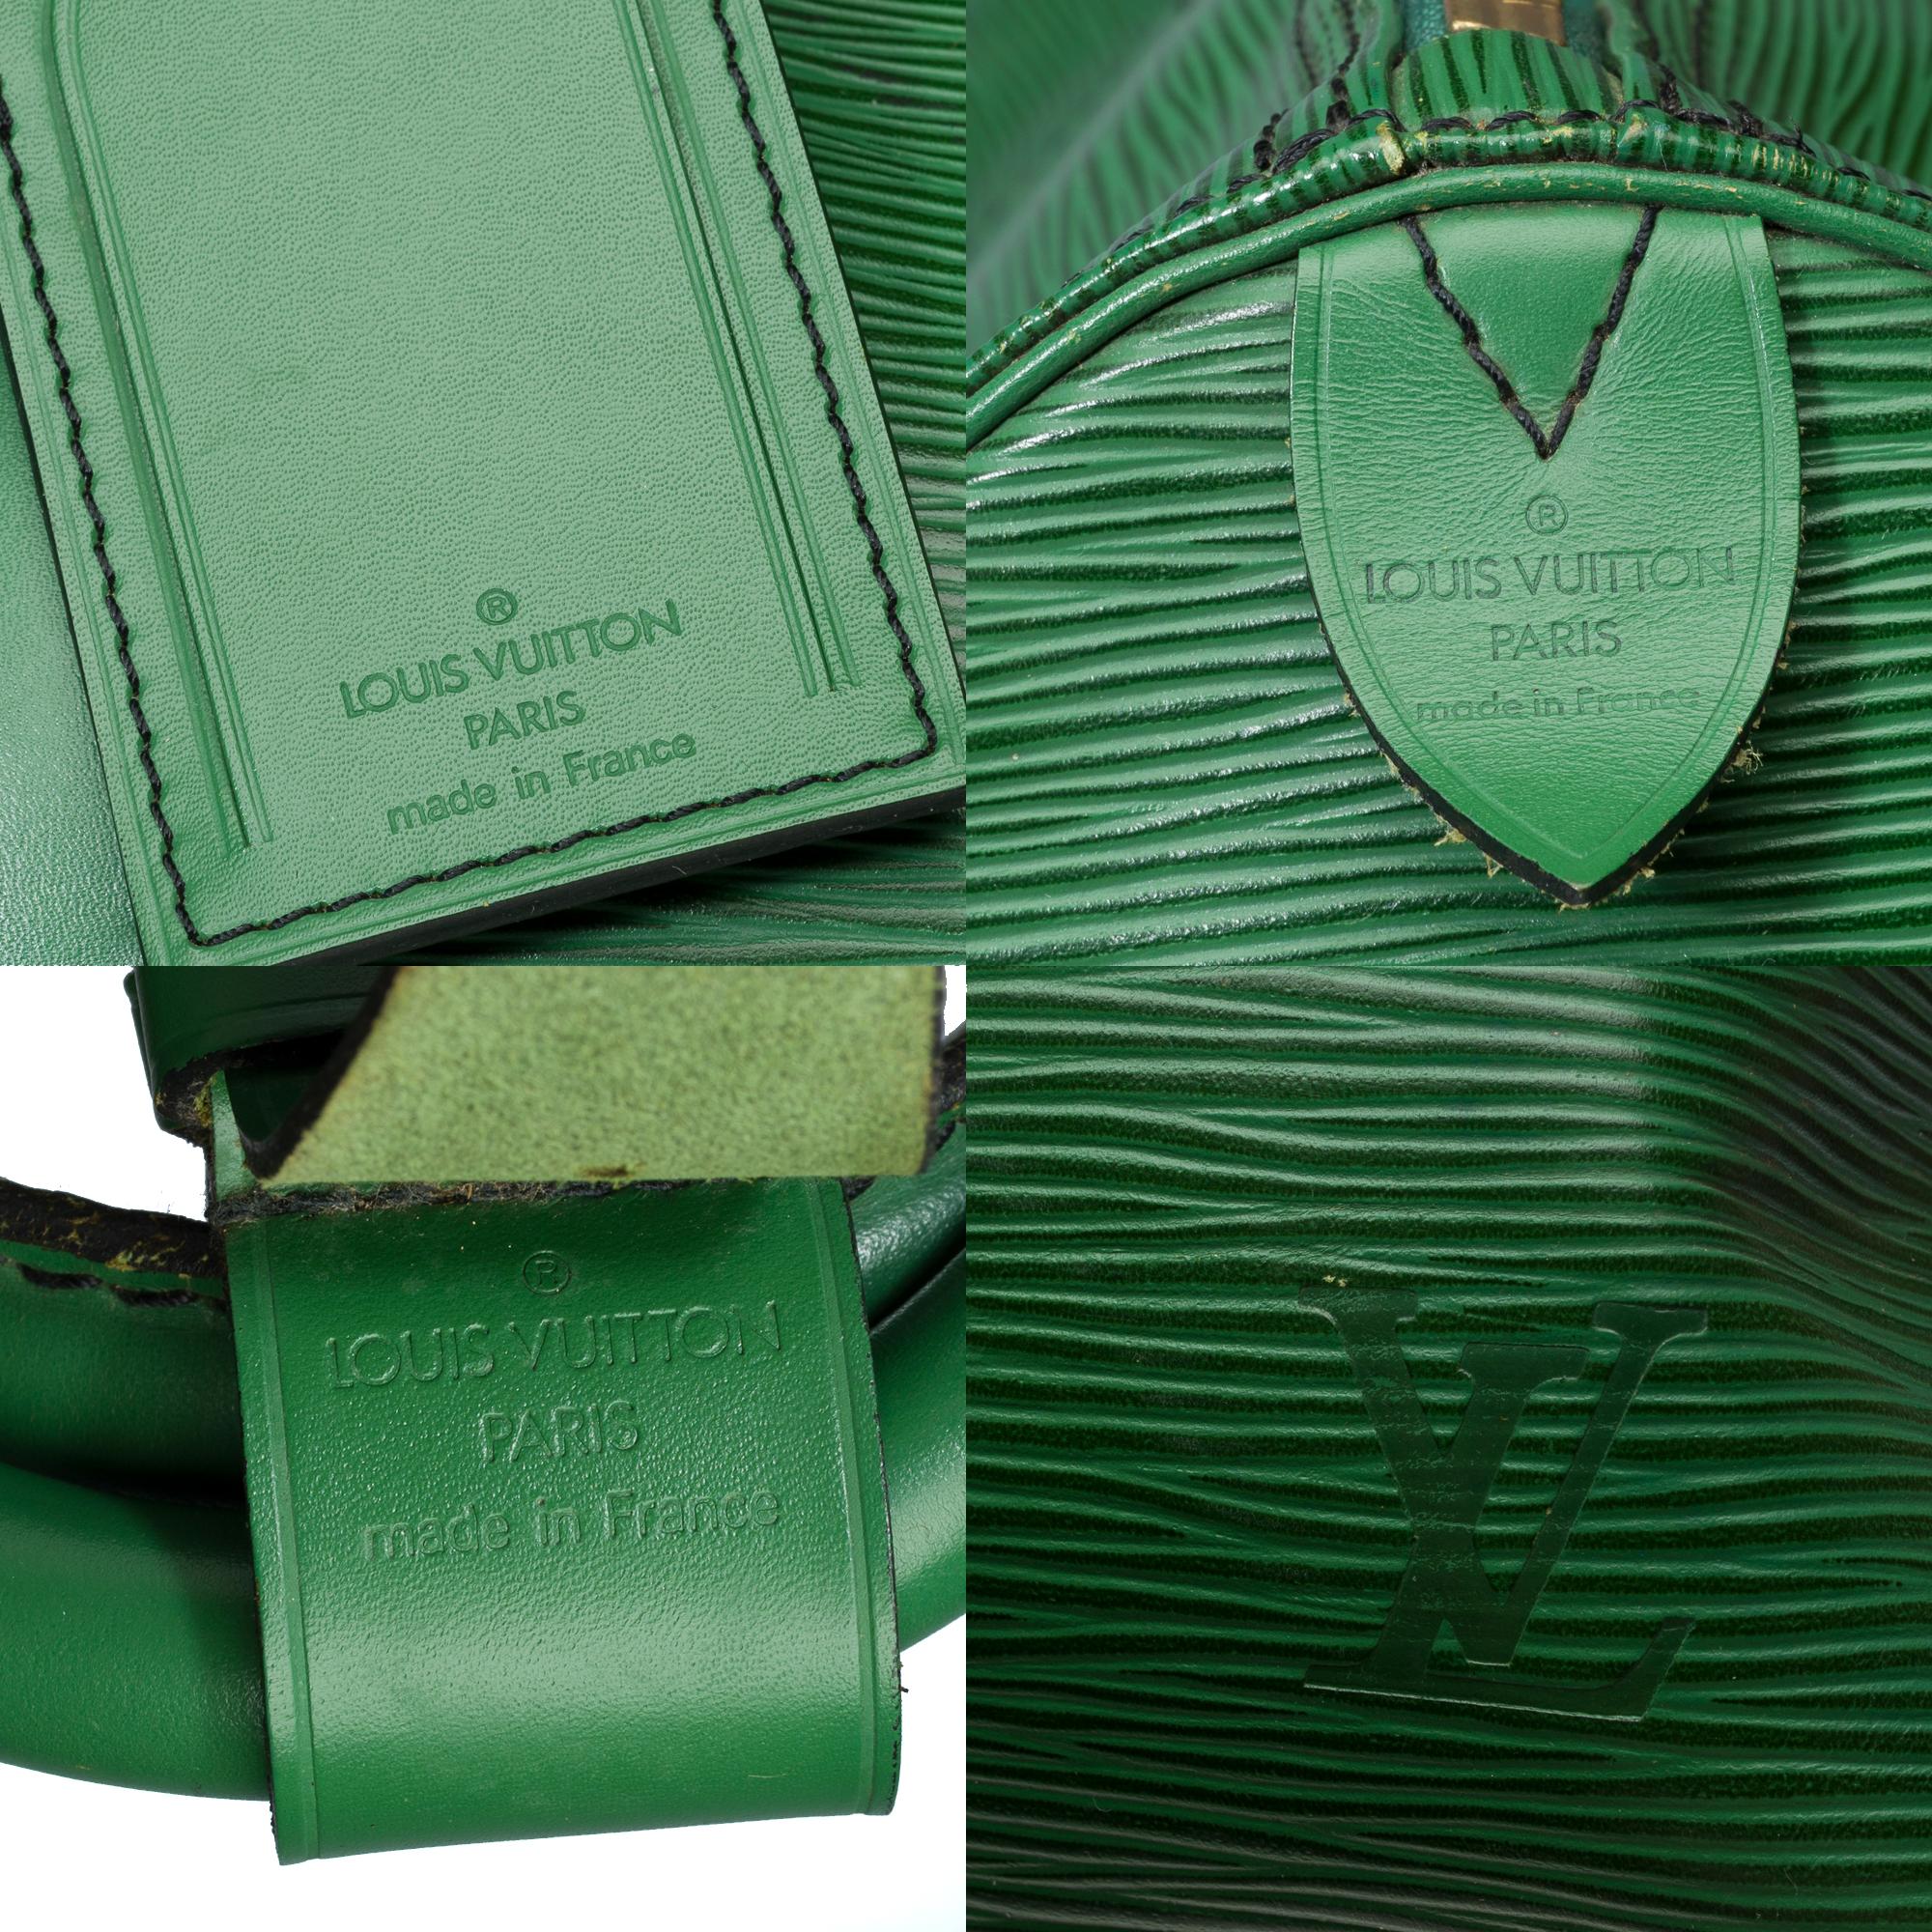 Louis Vuitton Keepall 50 Travel bag in Green épi leather, GHW For Sale 2